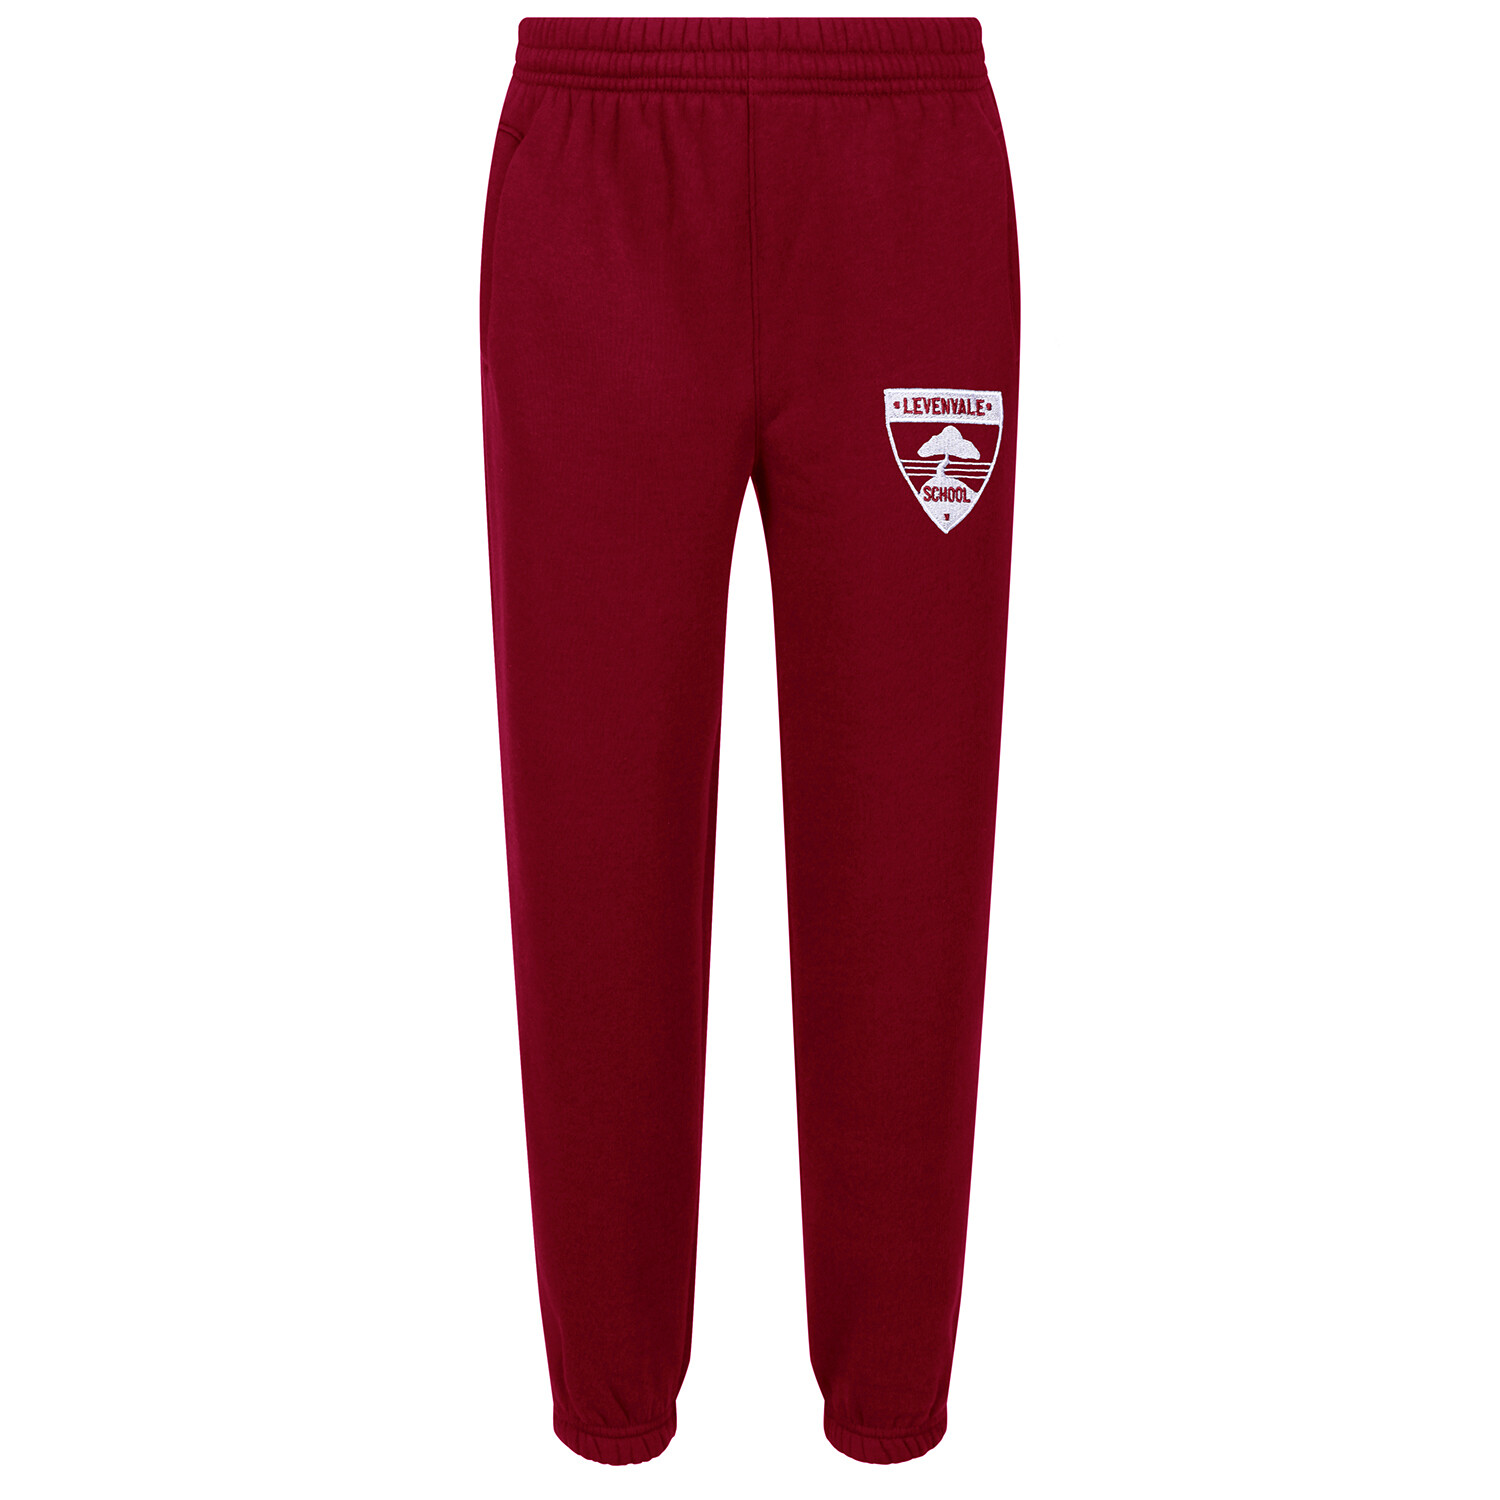 Levenvale Primary Jog Pant for PE & Outdoor Activity in Maroon